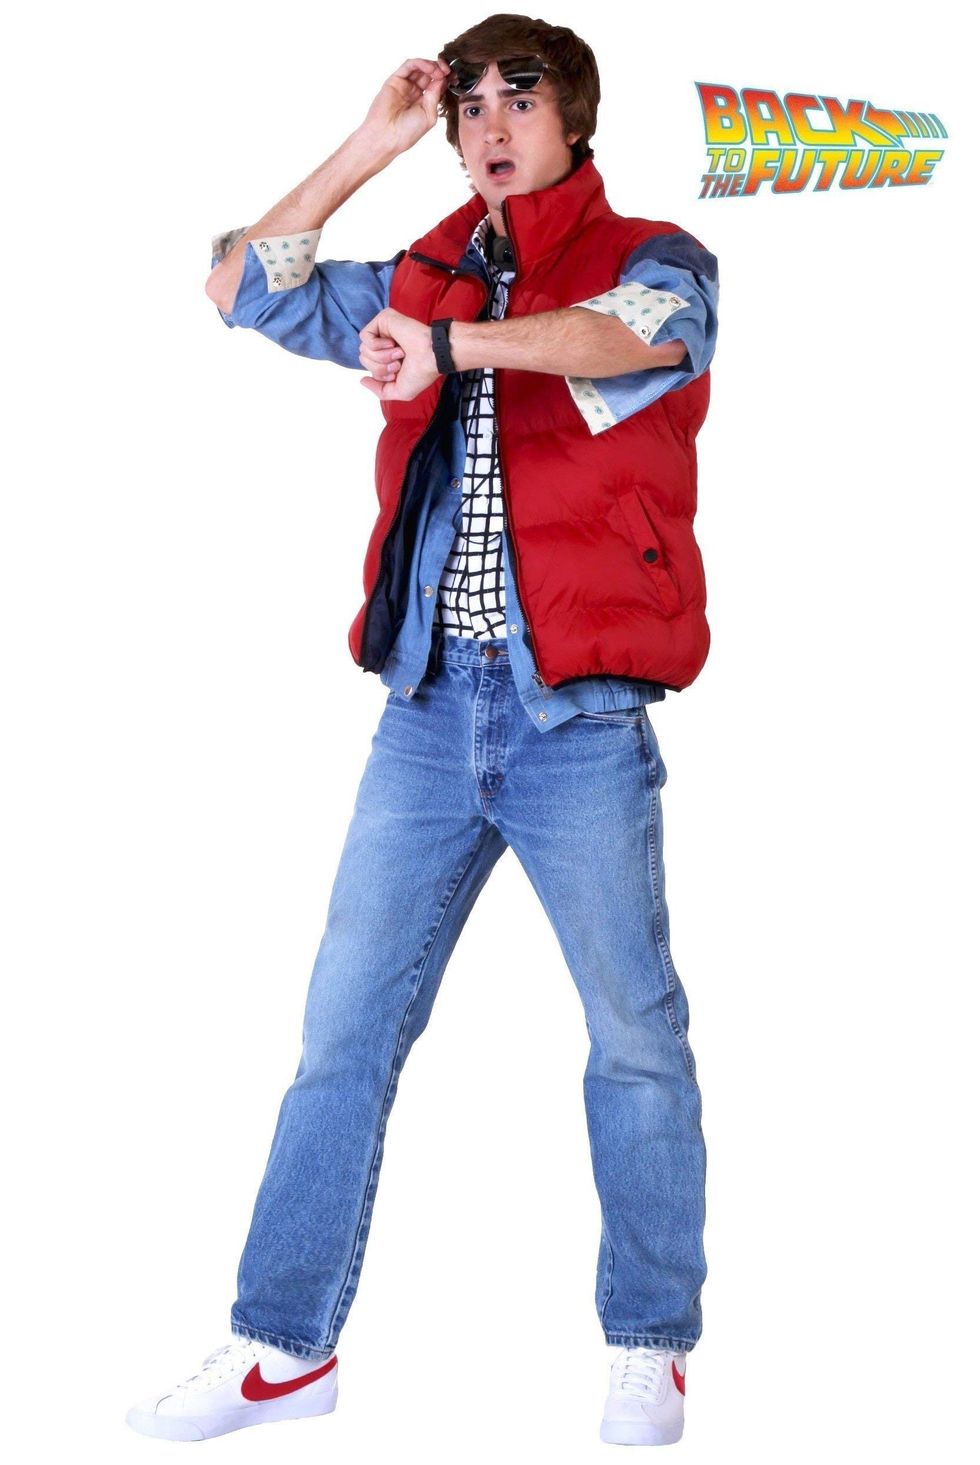 Marty McFly From 'Back to the Future'